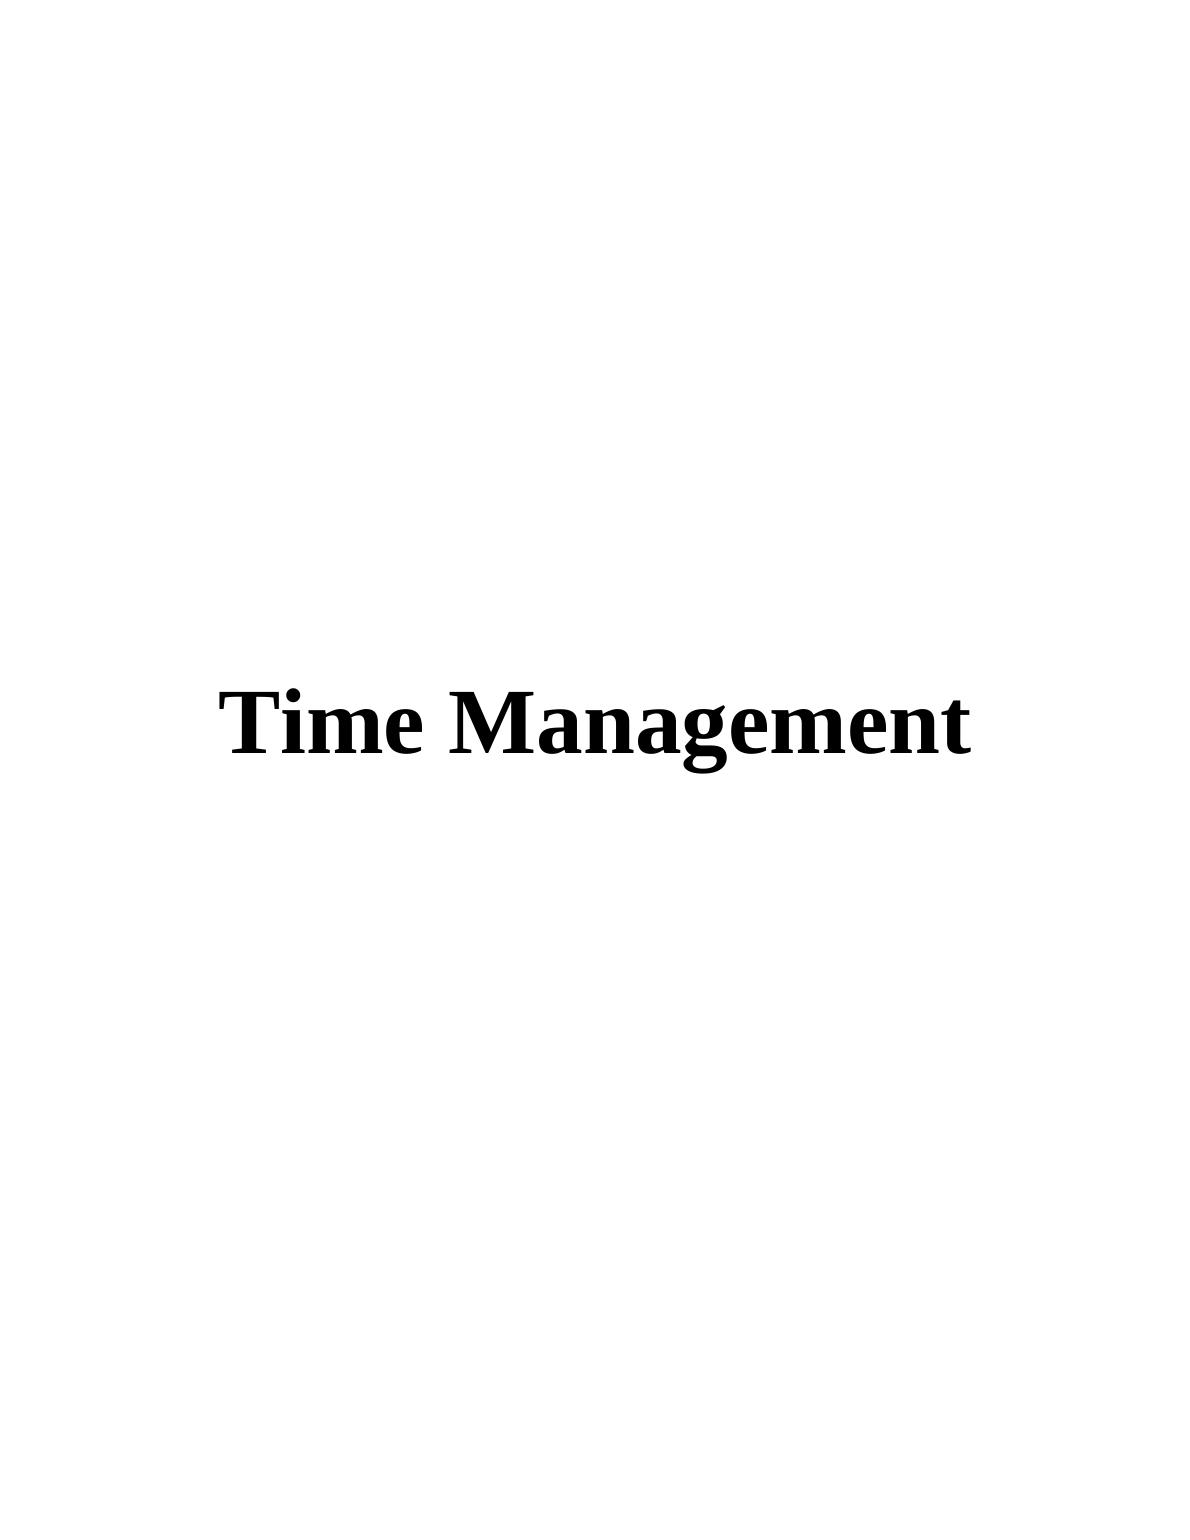 Time Management in Nestle: Current Offerings, Target Market, and SWOT Analysis_1